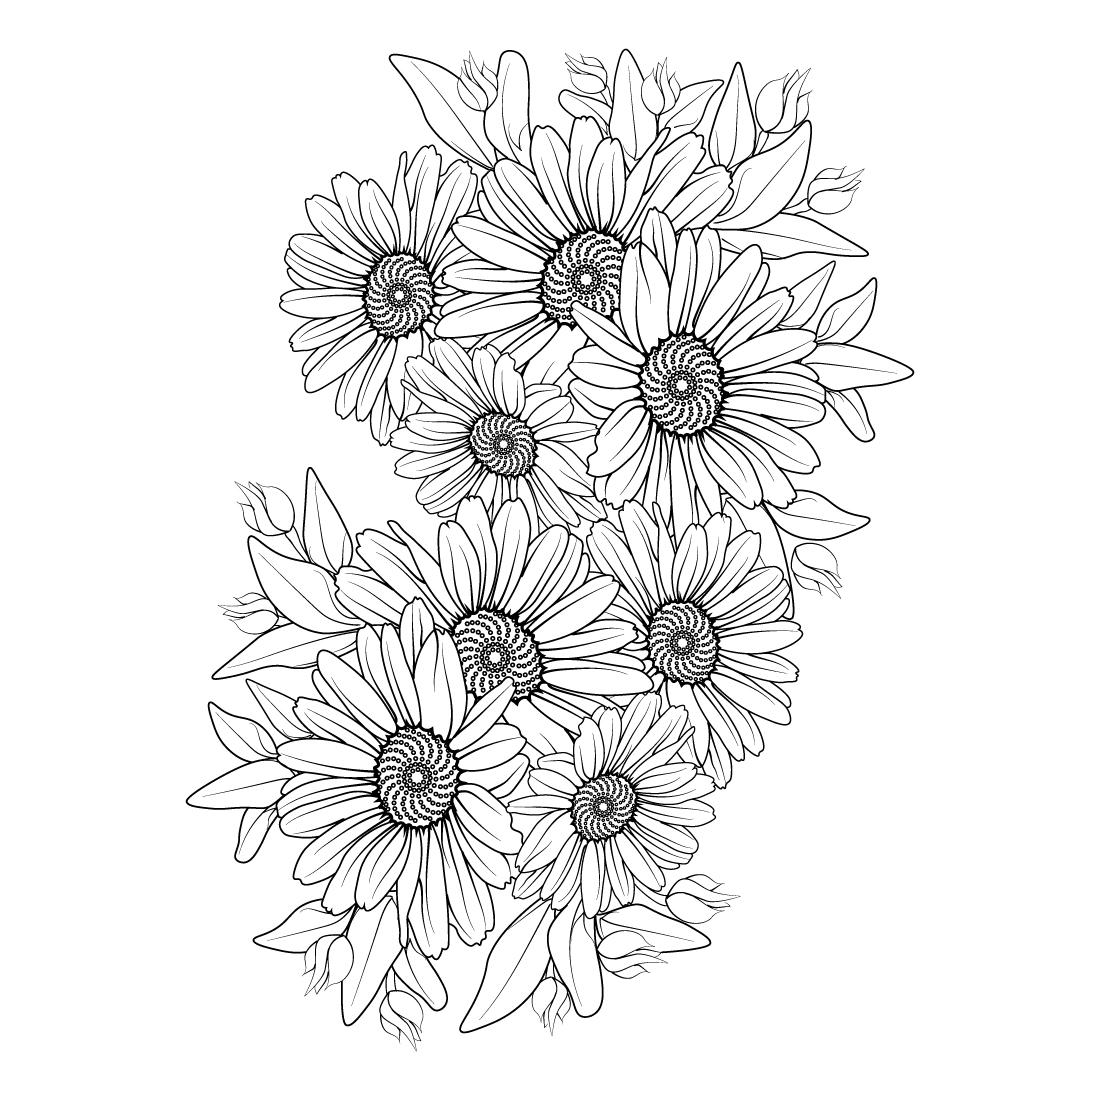 Daisy flower coloring pages, daisy flower bouquet tattoo, small daisy tattoo, preview image.